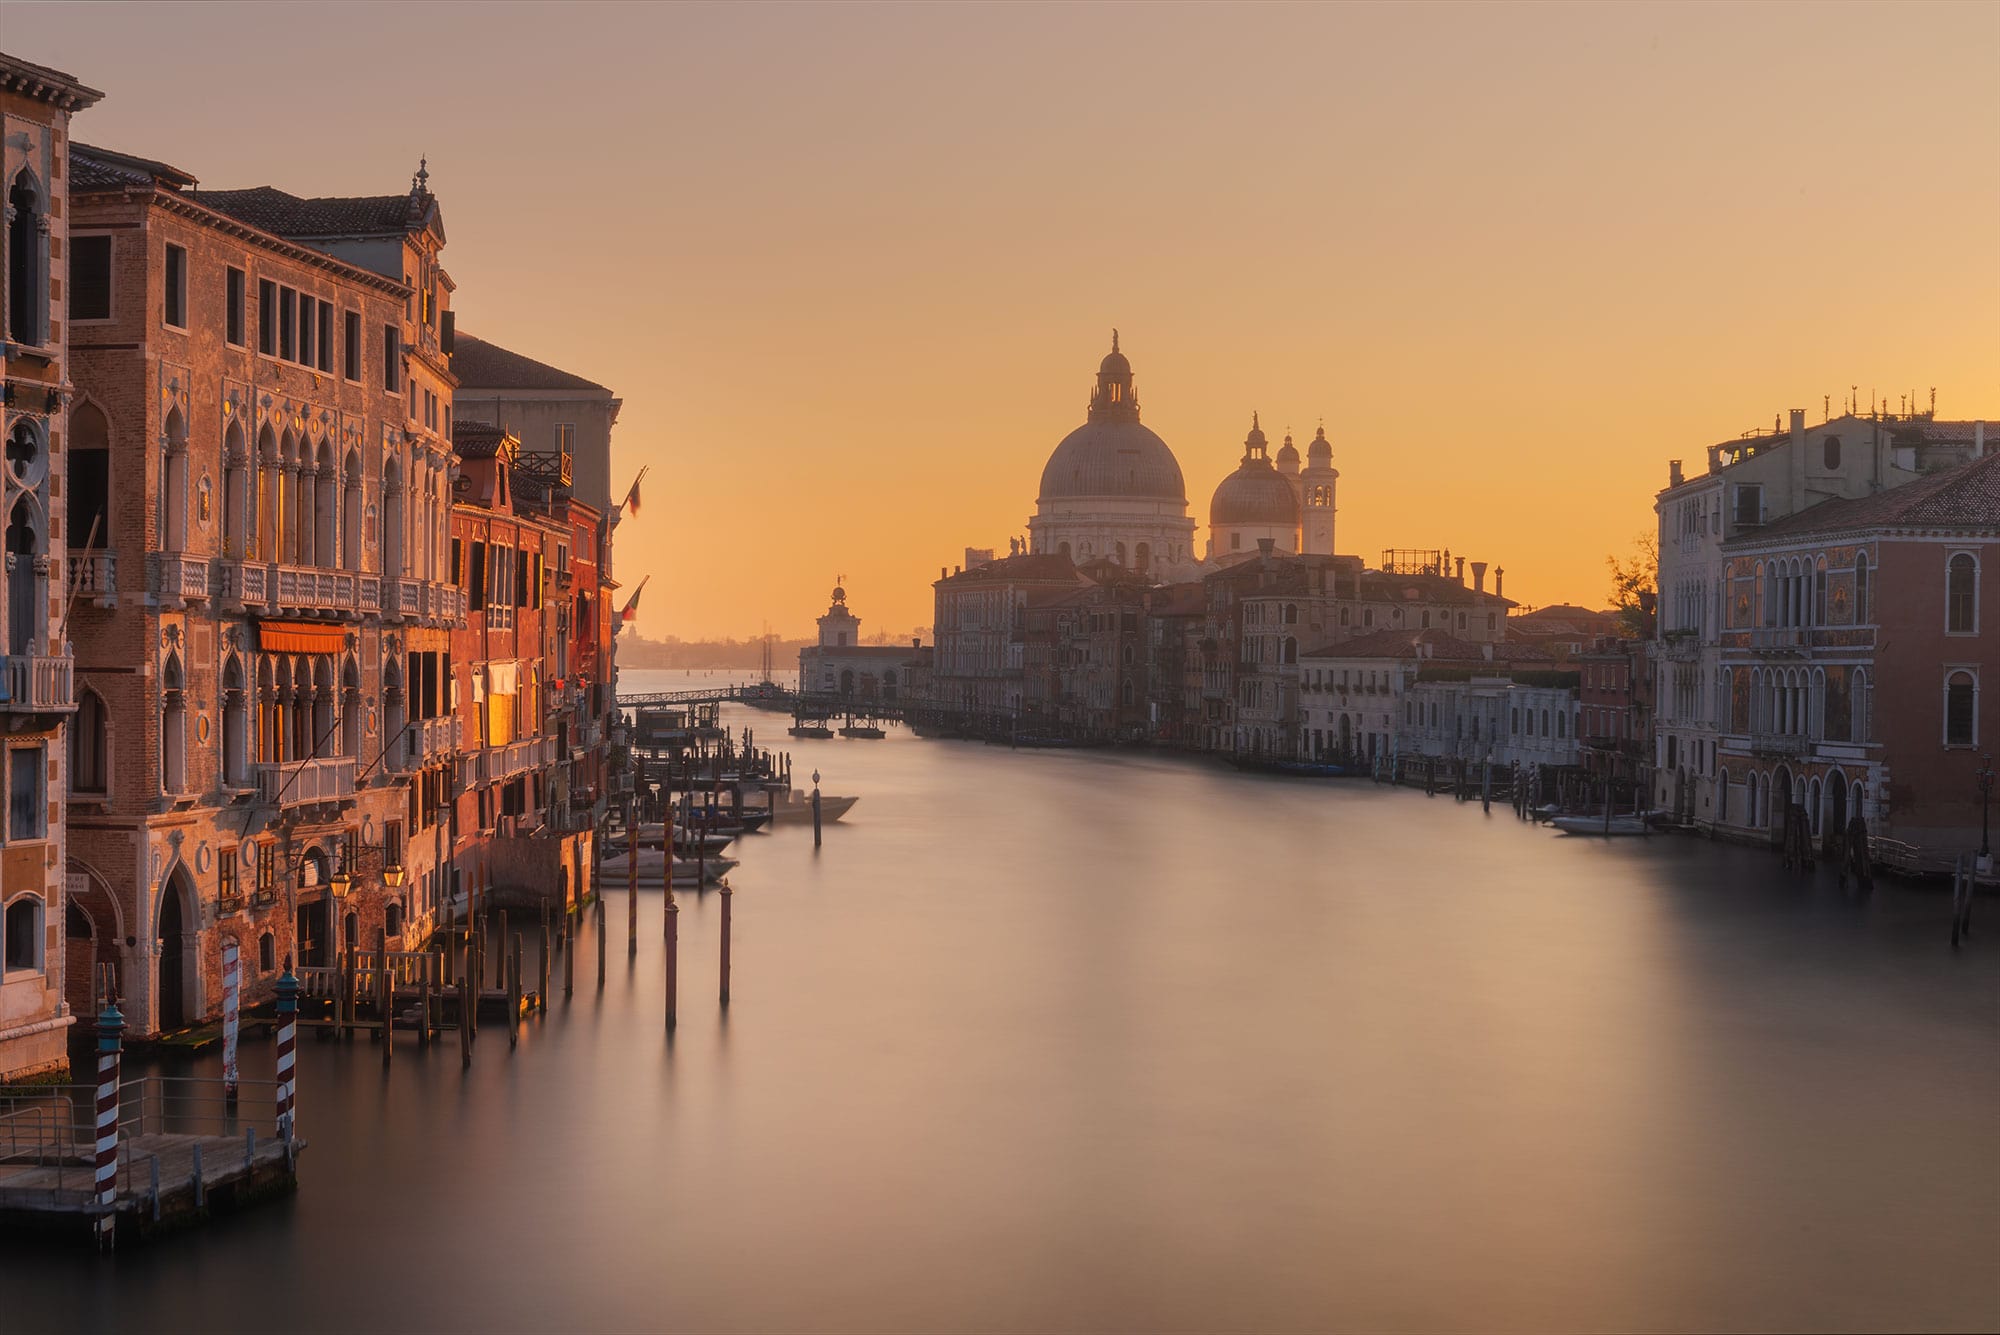 Experience the enchanting beauty of Venice at sunrise with this captivating urban landscape photograph. The iconic Grand Canal and Basilica Santa Maria della Salute are bathed in warm hues of orange, creating a mesmerizing scene that evokes a sense of tranquility and wonder. Taken by the skilled eye of a female travel photographer in Italy, this stunning image captures the essence of Venice's timeless charm and architectural splendor. Immerse yourself in the romantic allure of the Grand Canal as it comes to life in the soft light of dawn, beautifully captured by the talented photographer.